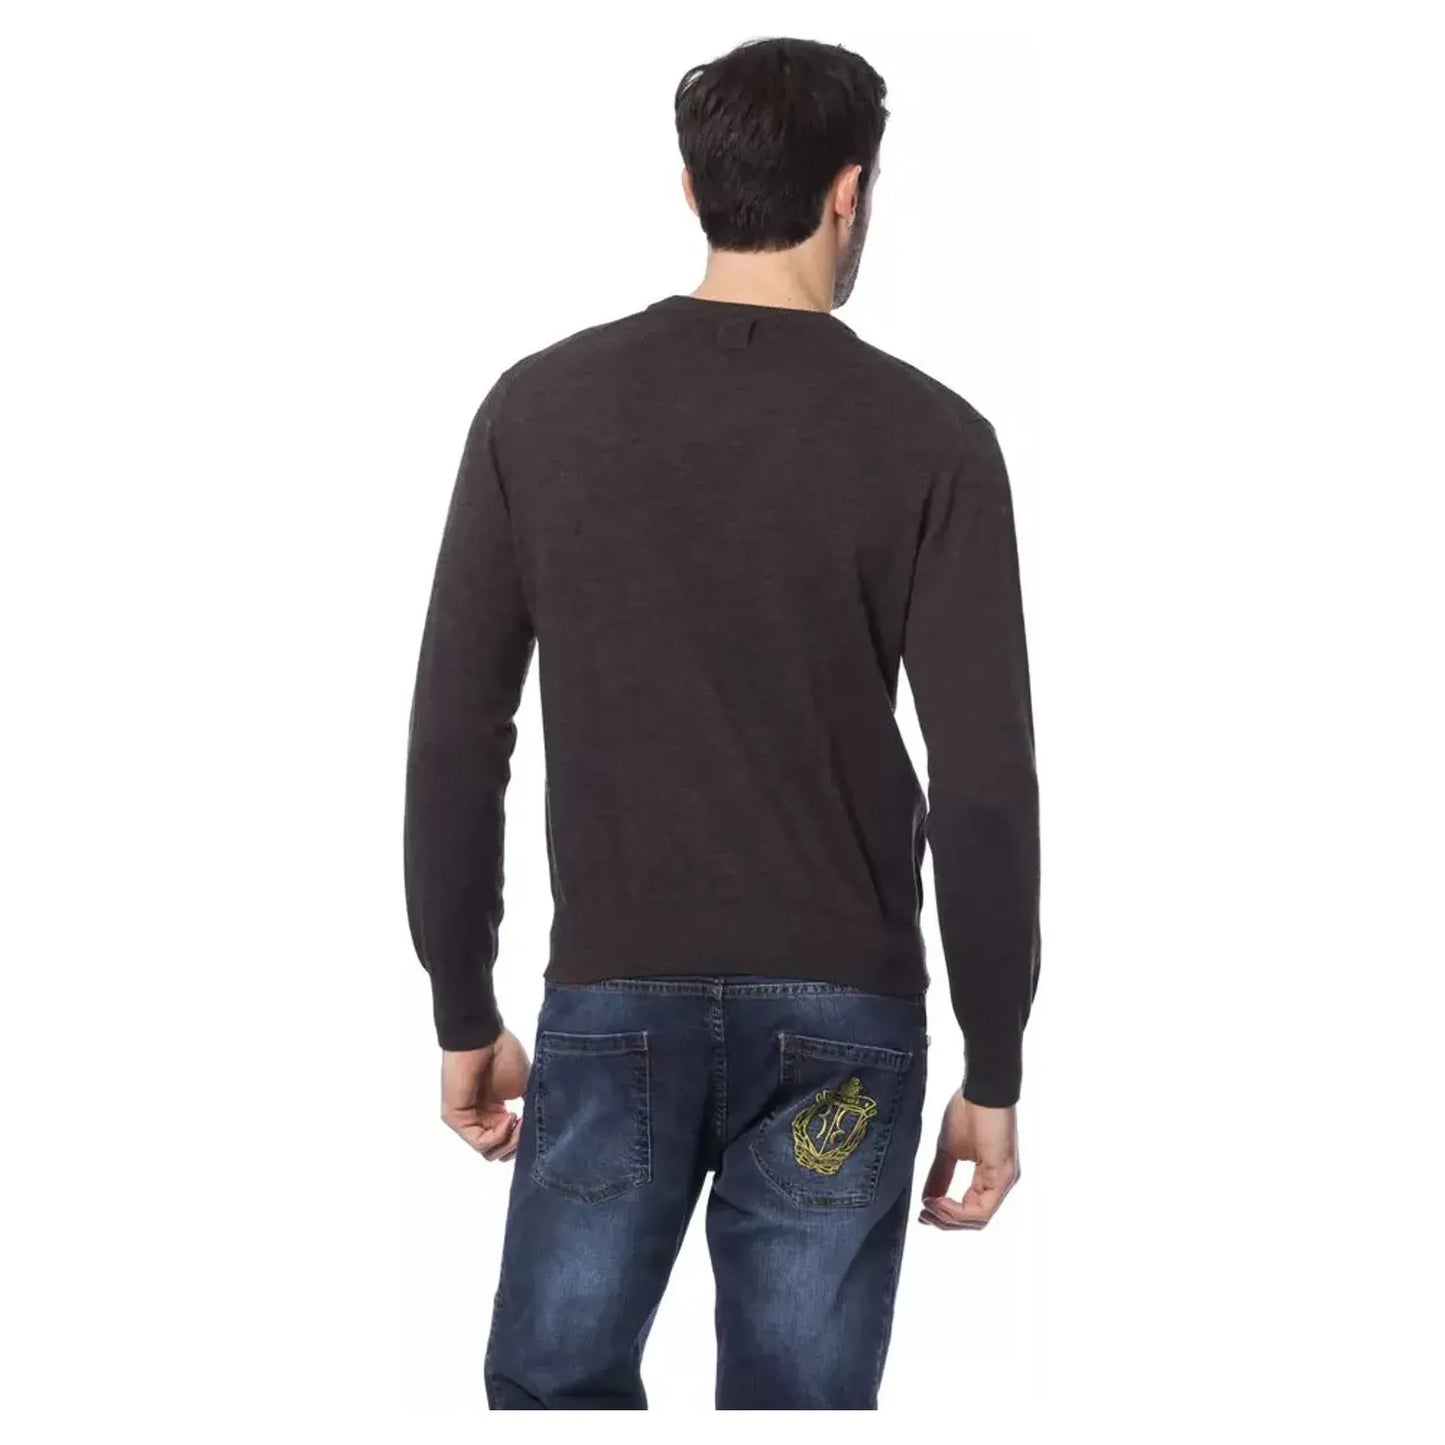 Billionaire Italian Couture Elegant Embroidered Merino Wool Sweater marr-brown-sweater stock_product_image_10491_1719569693-16-68b9559d-658.webp